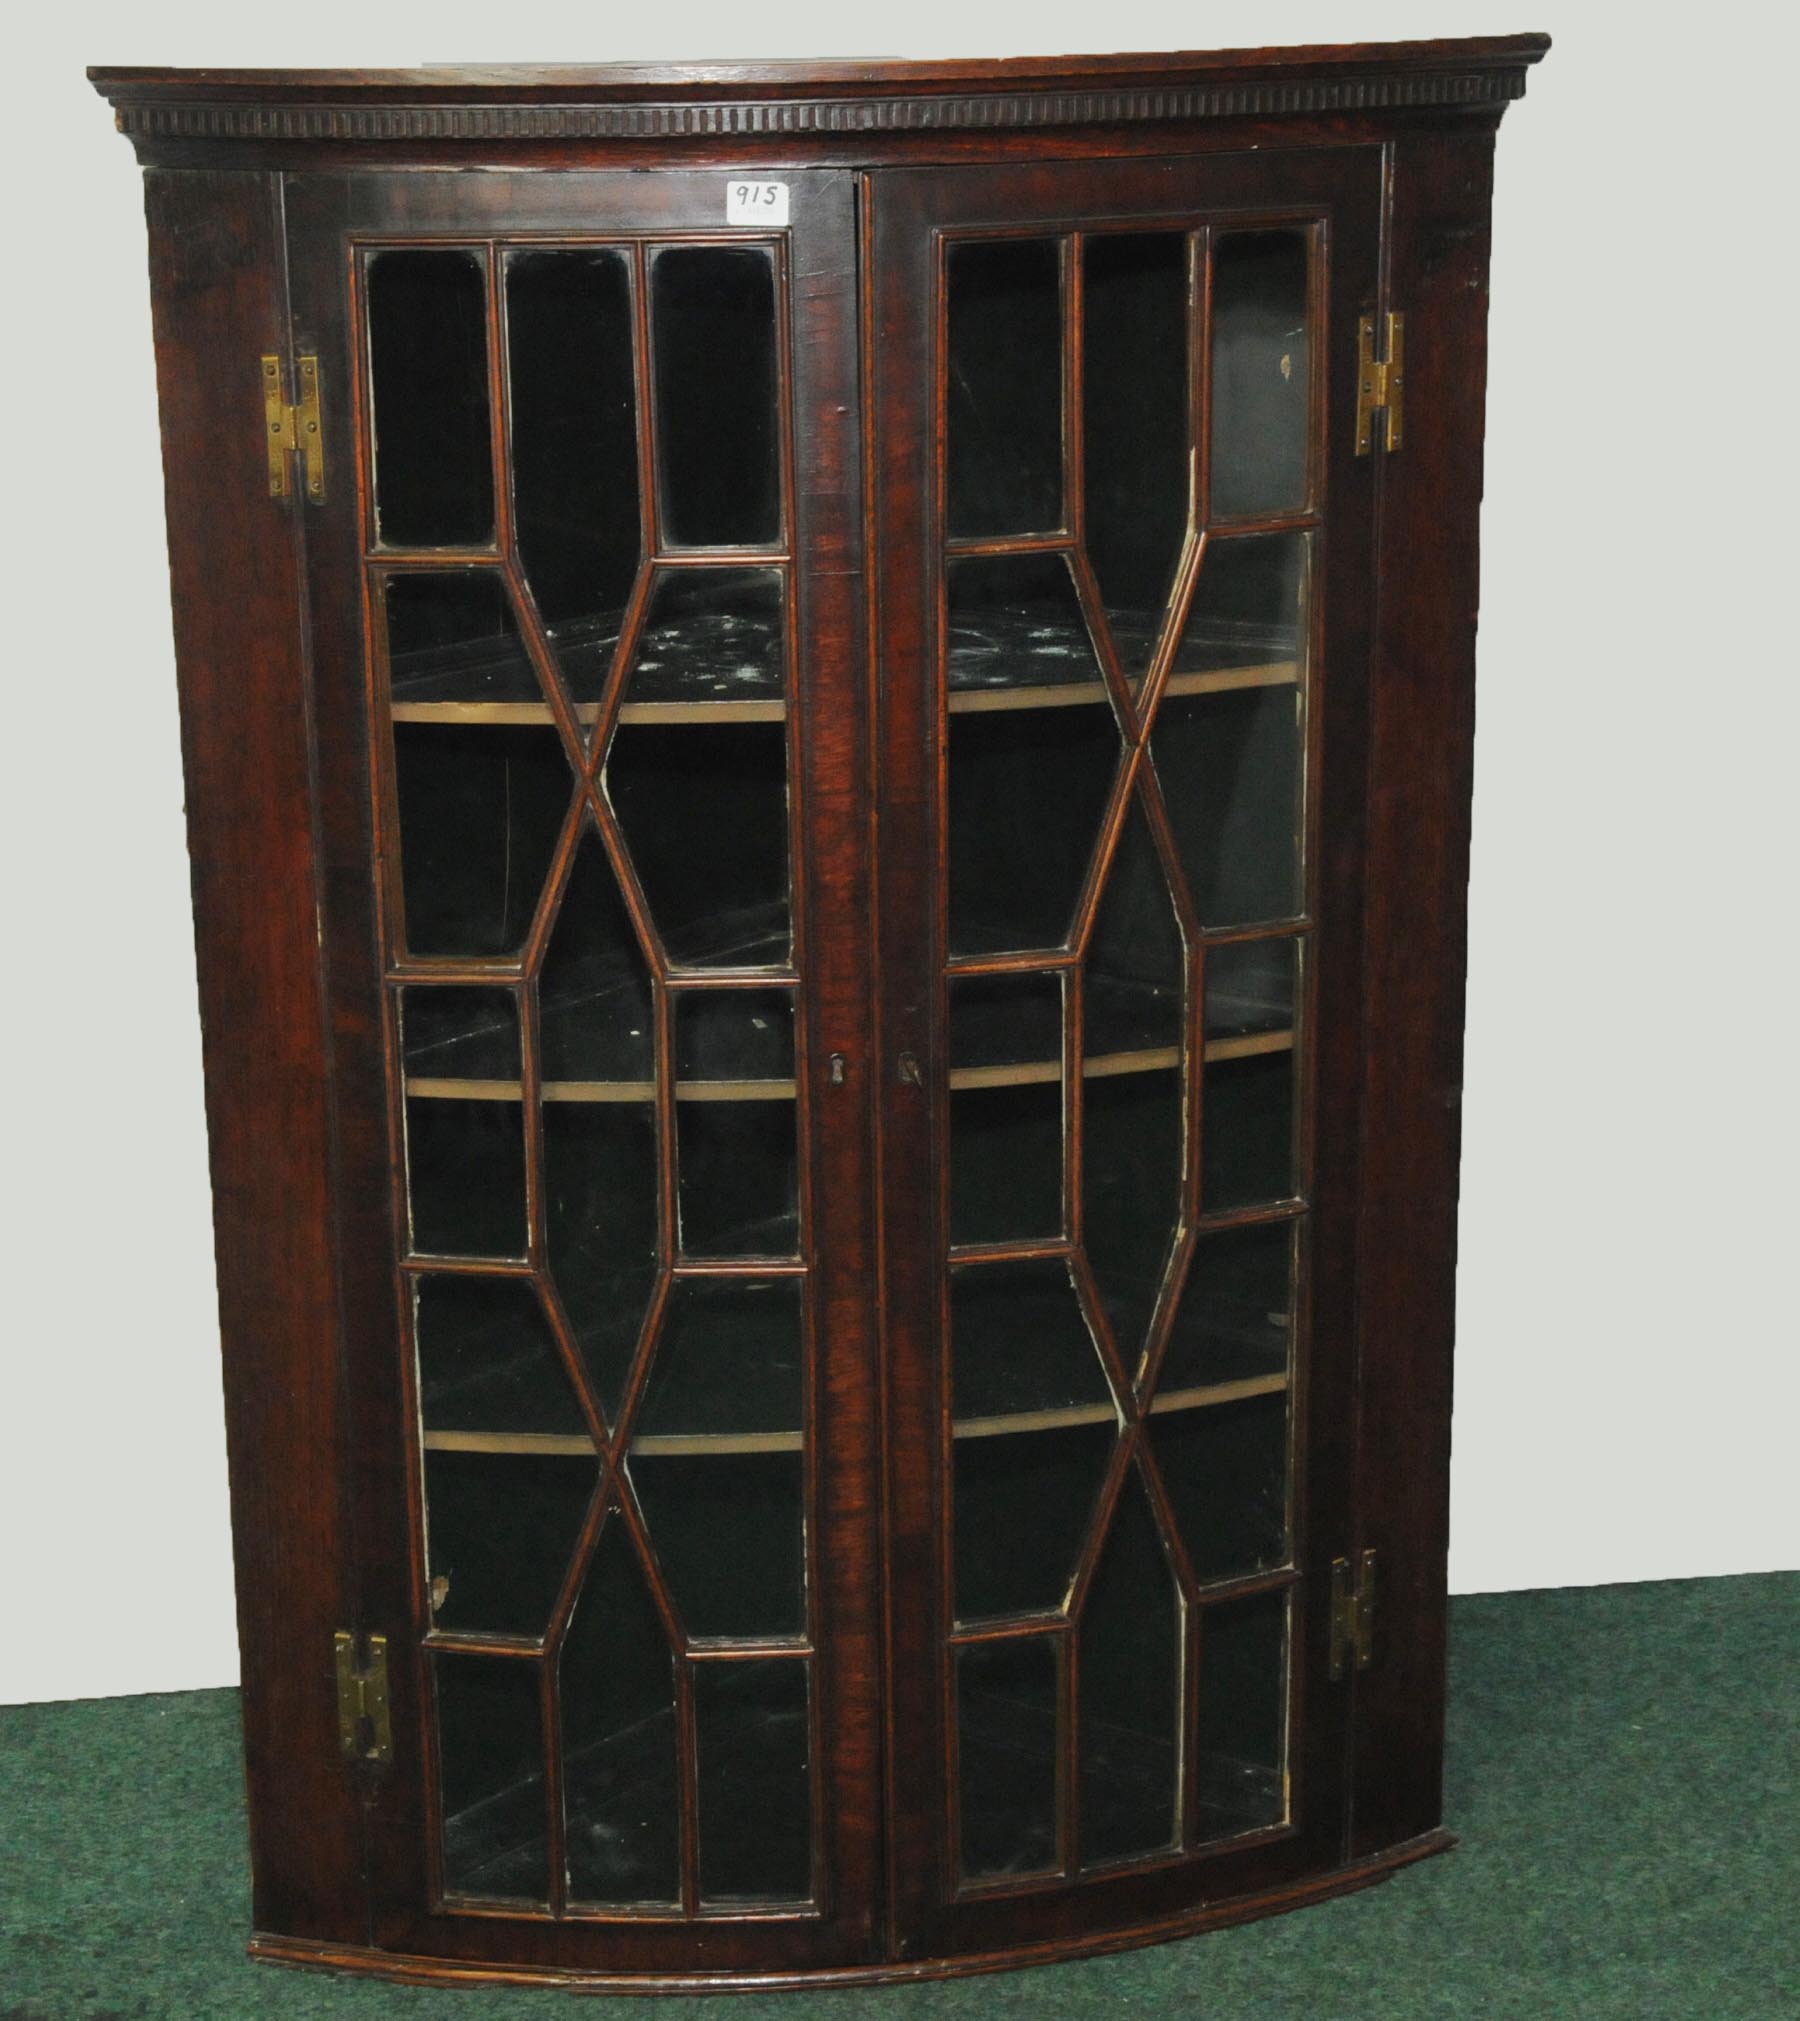 19th century mahogany bow front hanging corner cabinet with moulded pediment above glazed astragal